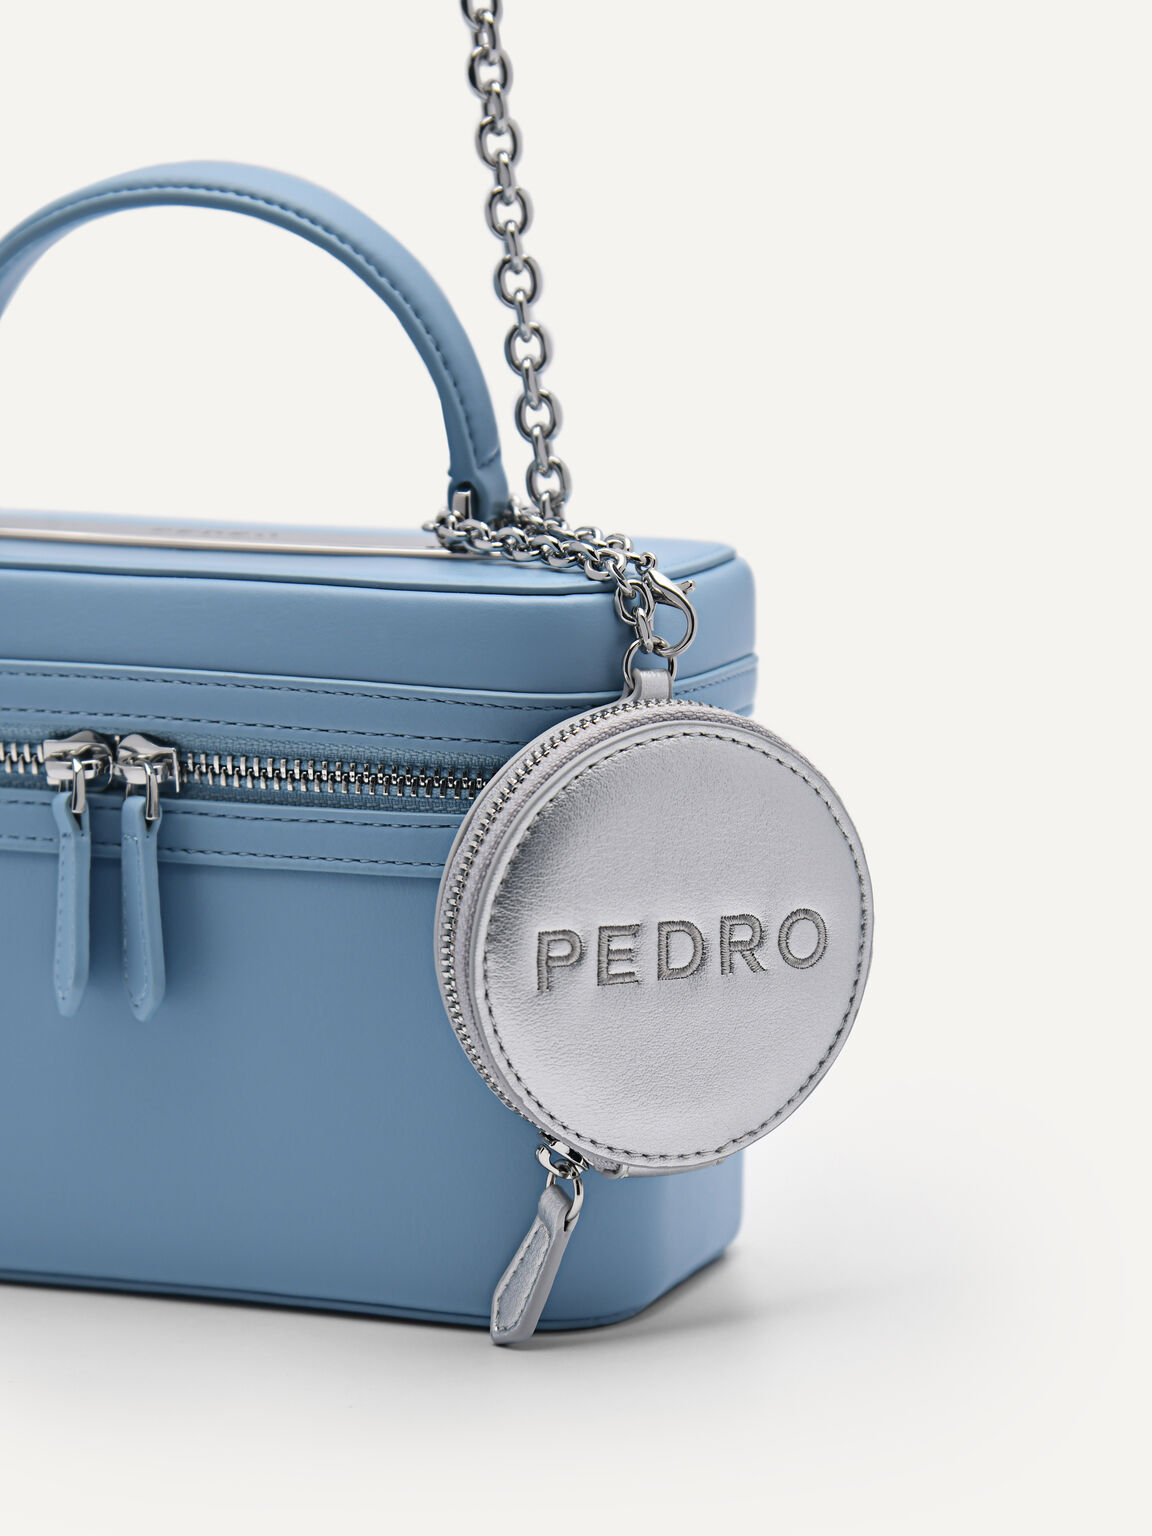 Trendy_Bee - PEDRO Buckled Top Handle Structured Bag Price - 79000 MMK 📆  Waiting time - ard 4 weeks 🇸🇬 Direct from Singapore 💰Pre-order ,  Pre-paid #trendybee #pedro #buckled #tophandle